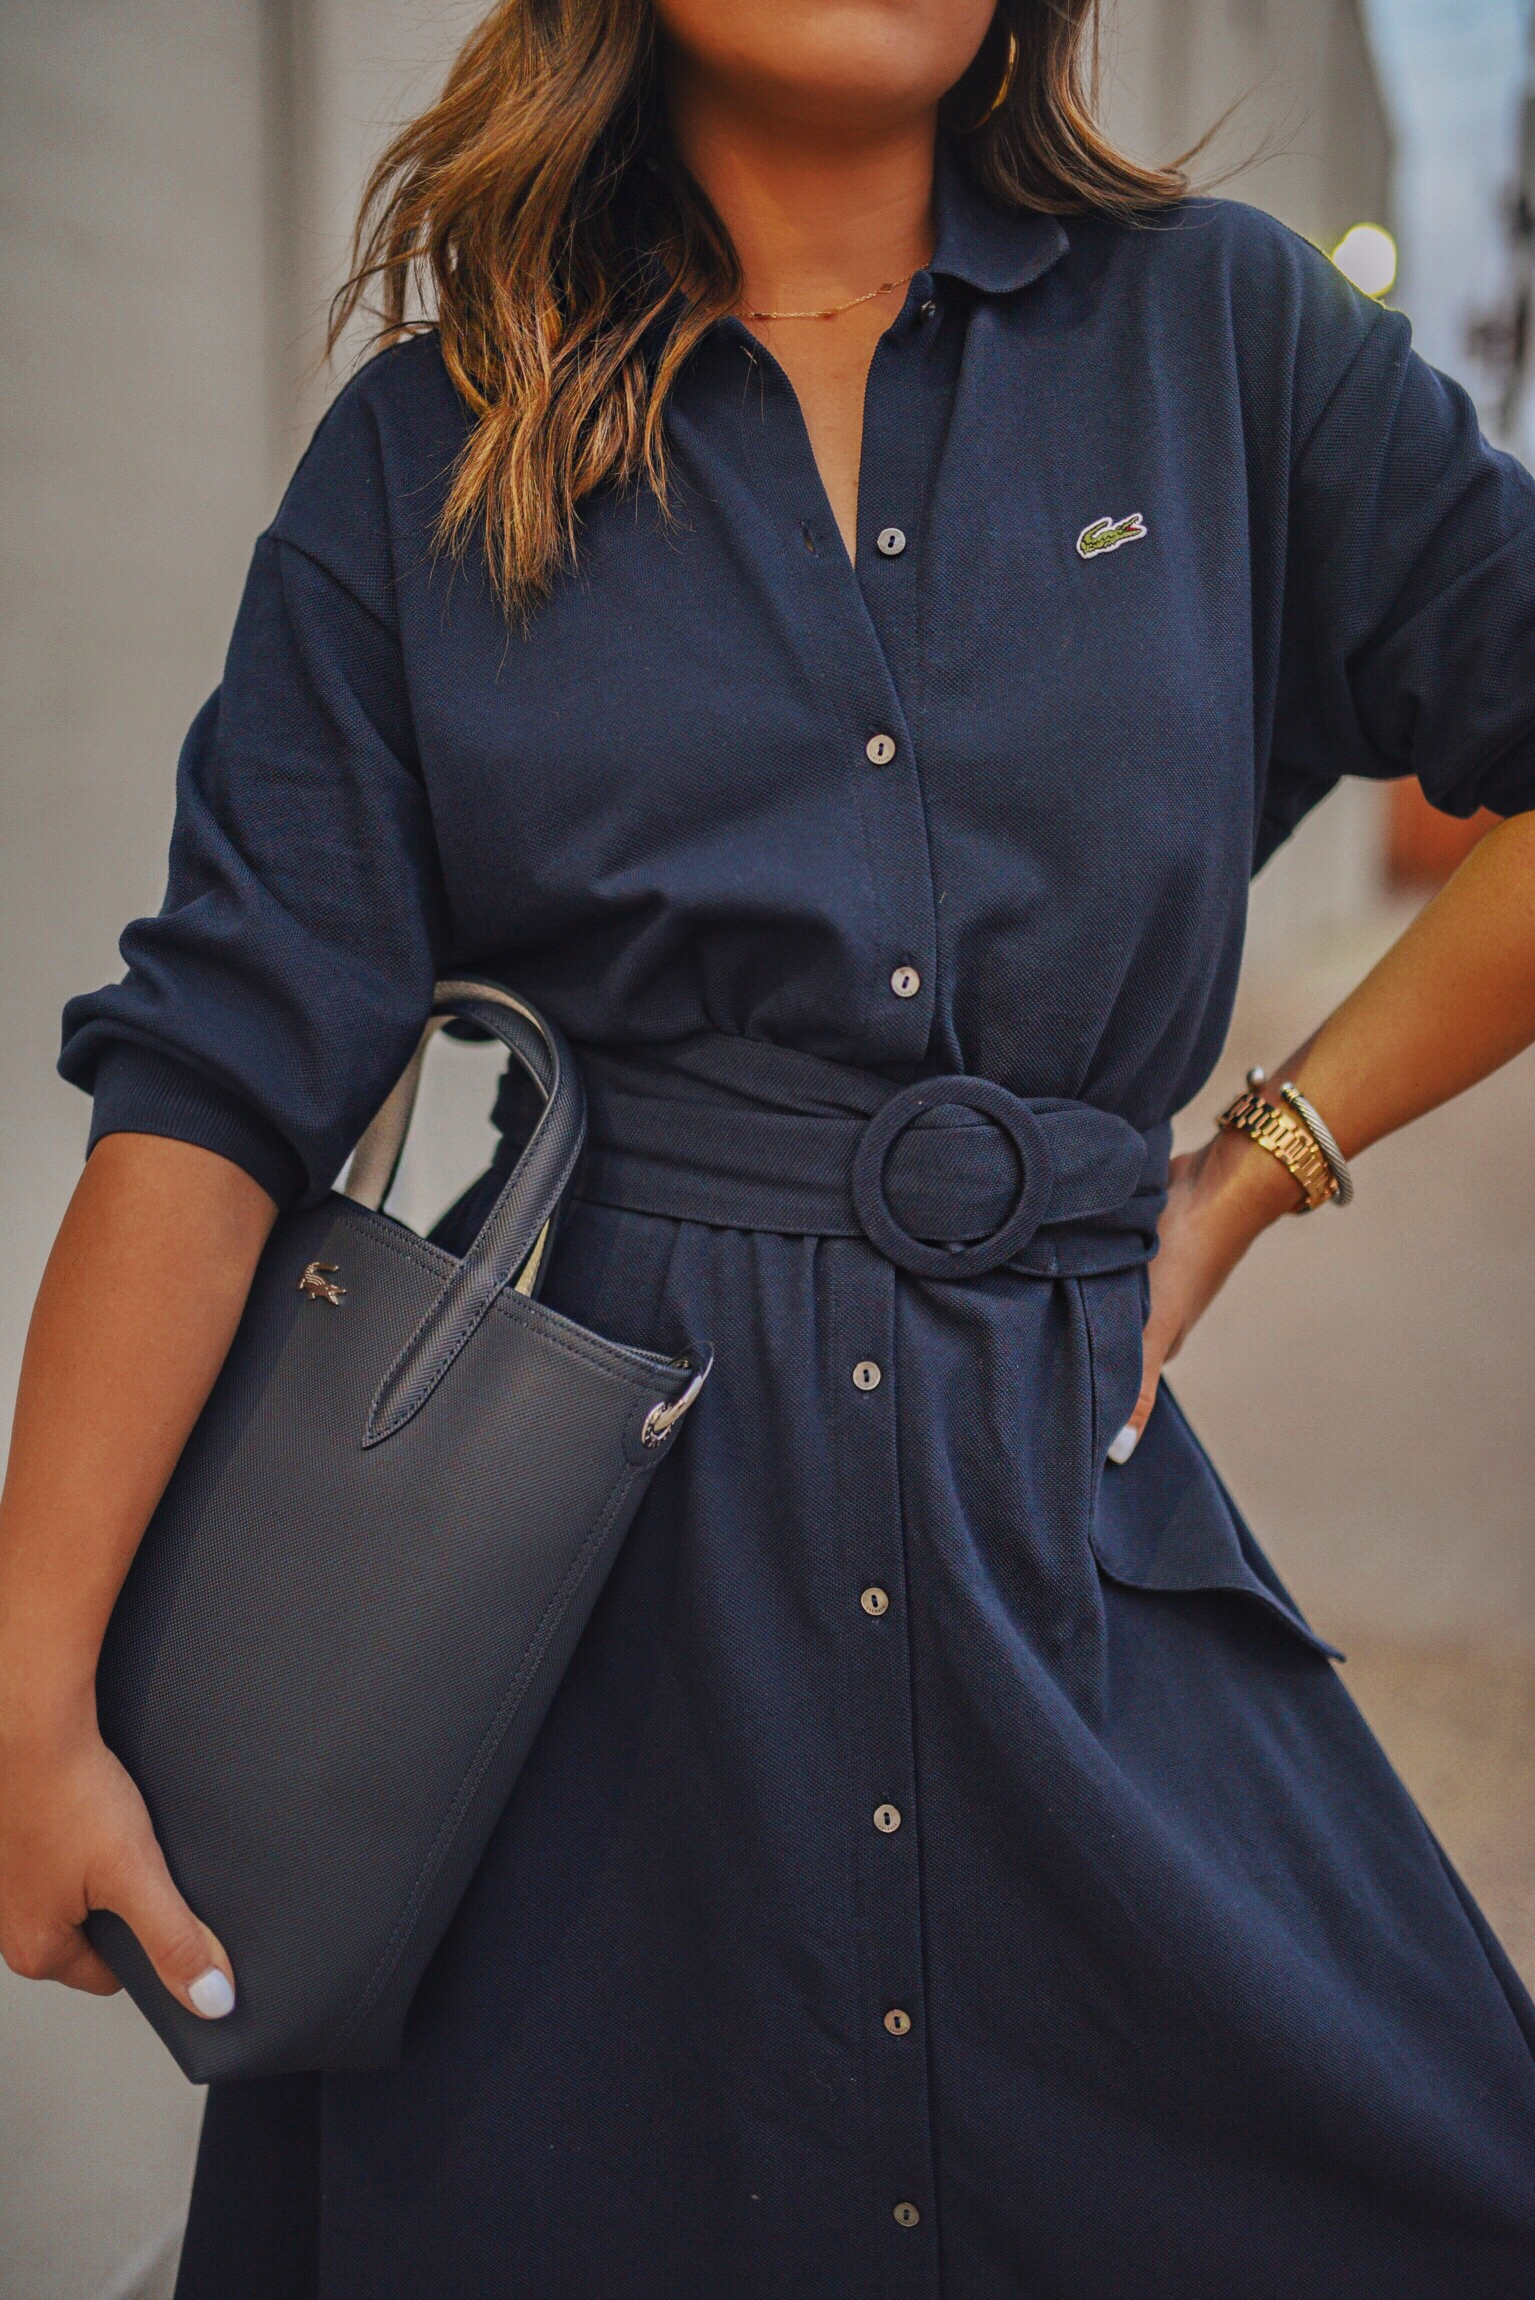 Carolina Hellal of Chic Talk wearing a Lacoste shirtdress, white sneakers and structured bag